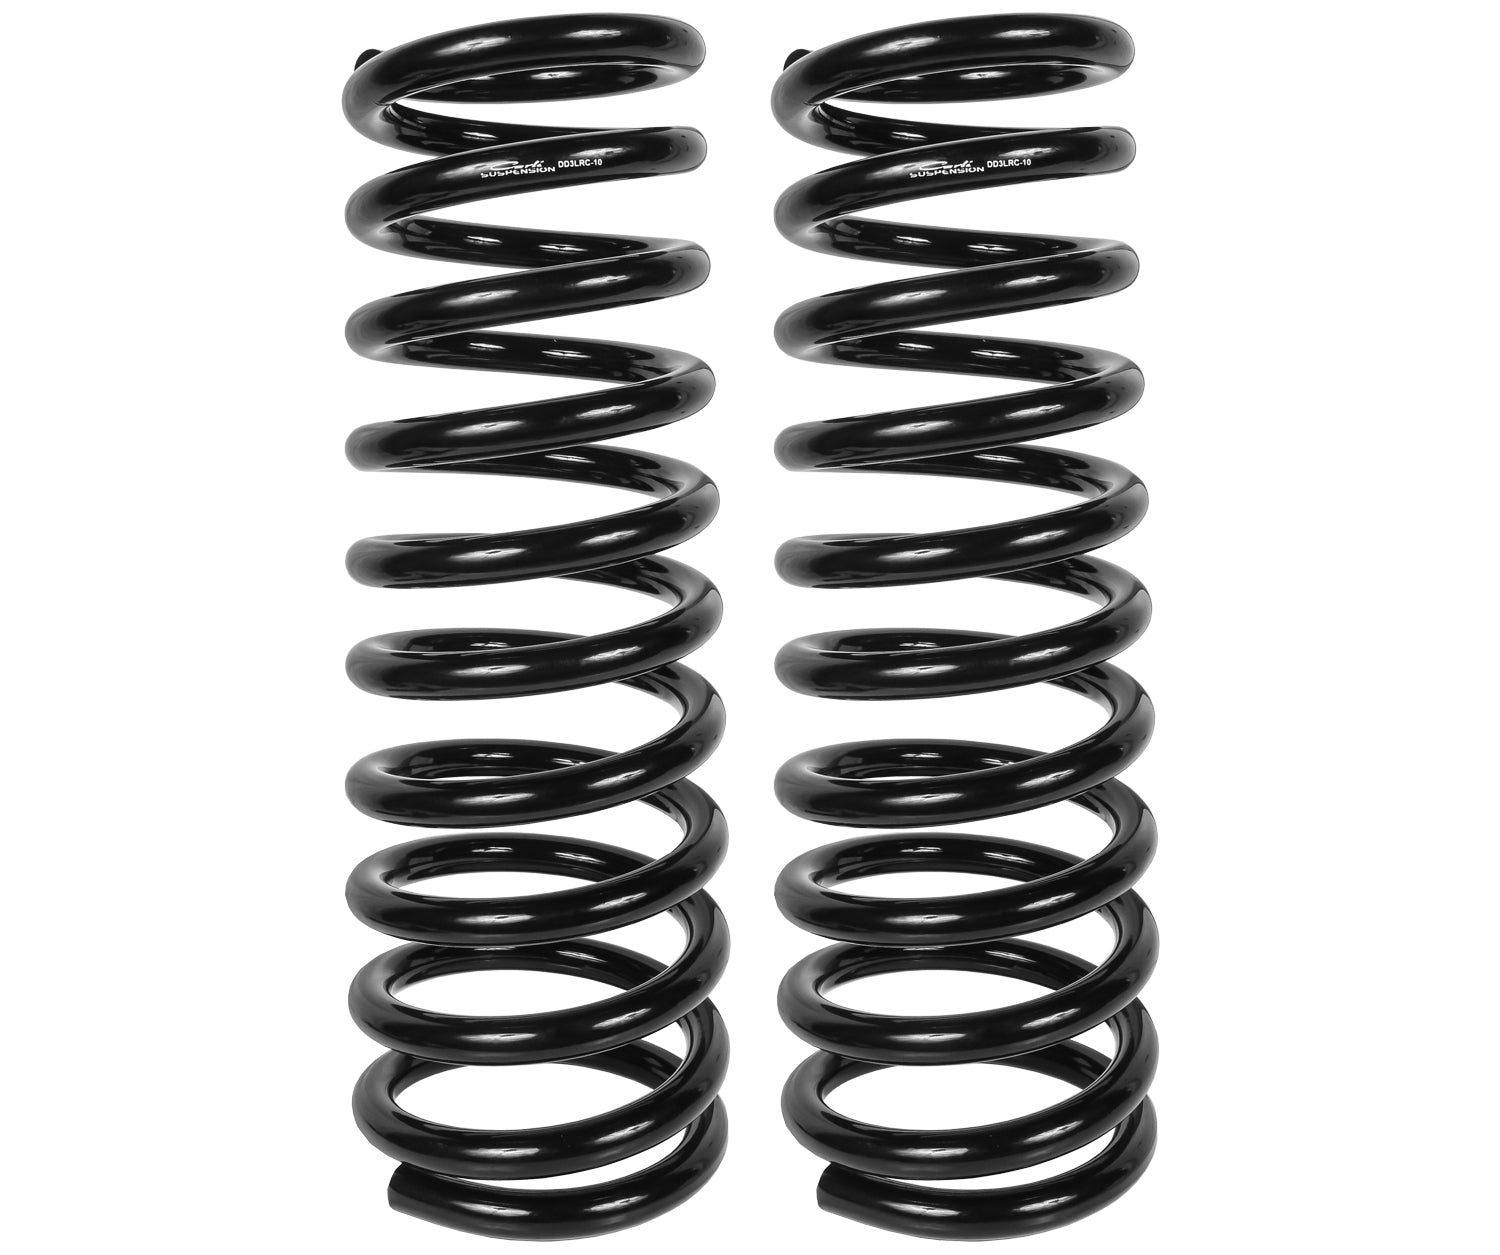 Carli Suspension CS-DLRC-10-D 3 inch Lift Front Linear Rate Coil Springs